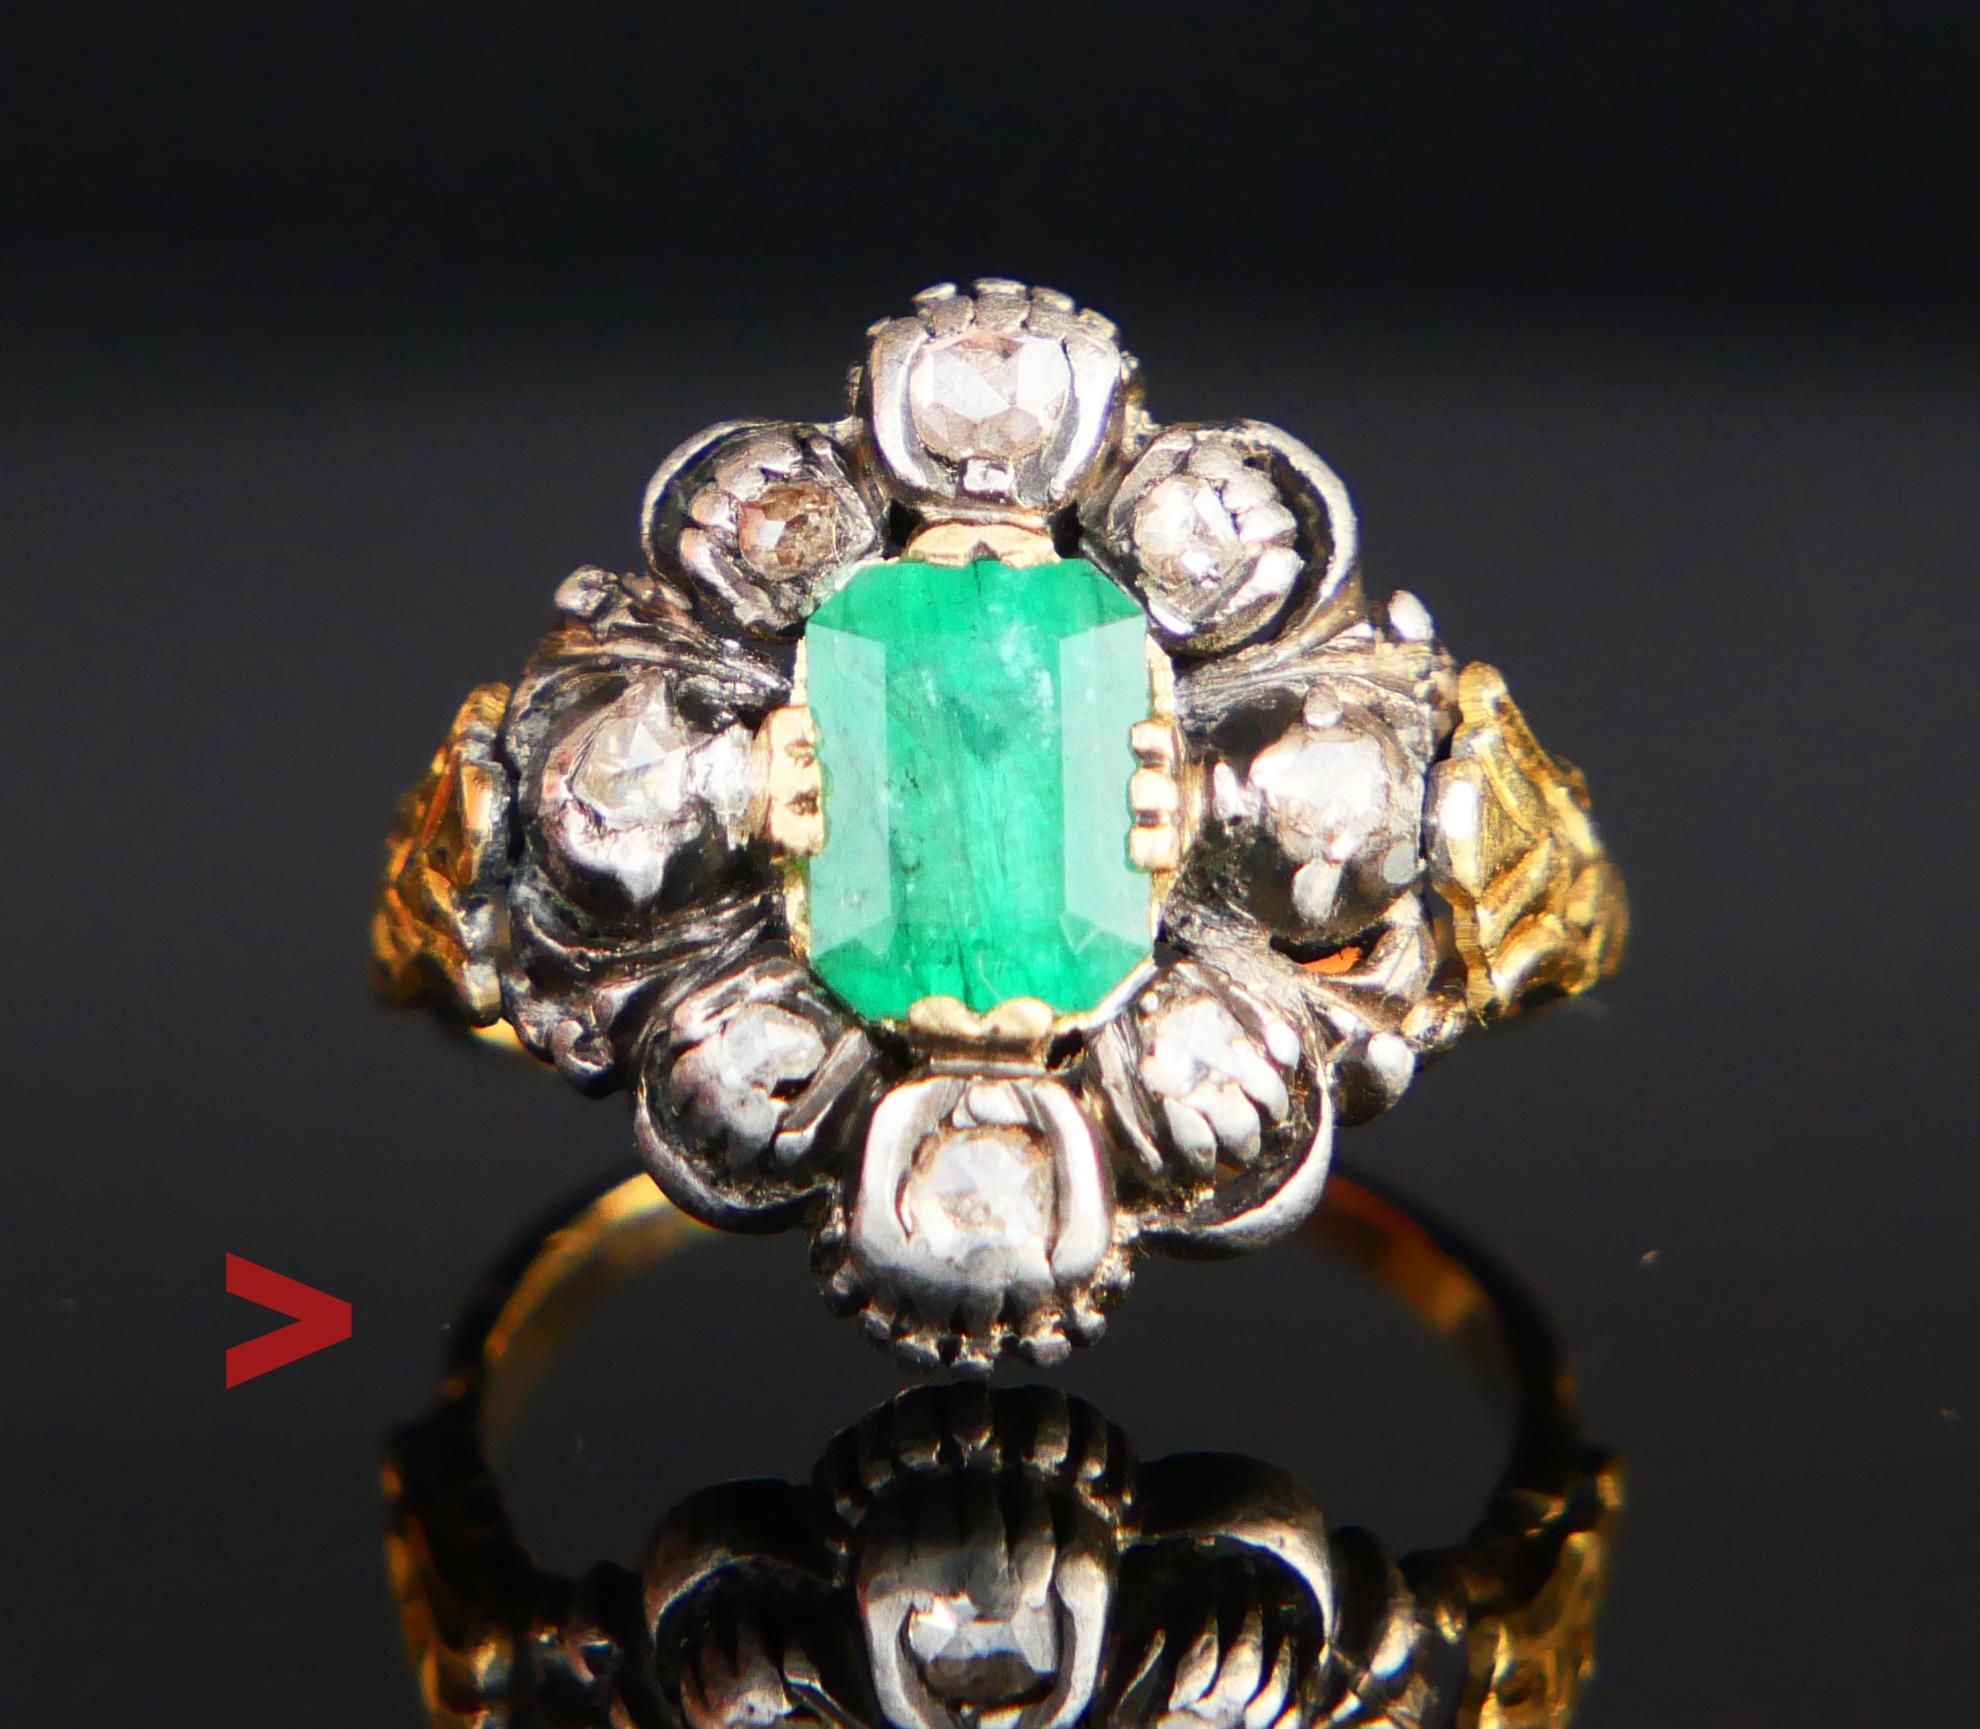 Nice Renaissance-styled cluster Ring with the carved band, shoulders, and parts of the crown in solid 18ct greenish Yellow Gold holding natural Emerald stone and four rose - cut Diamonds set in Silver clusters.

Crown 16 mm x 13 mm x 5 mm